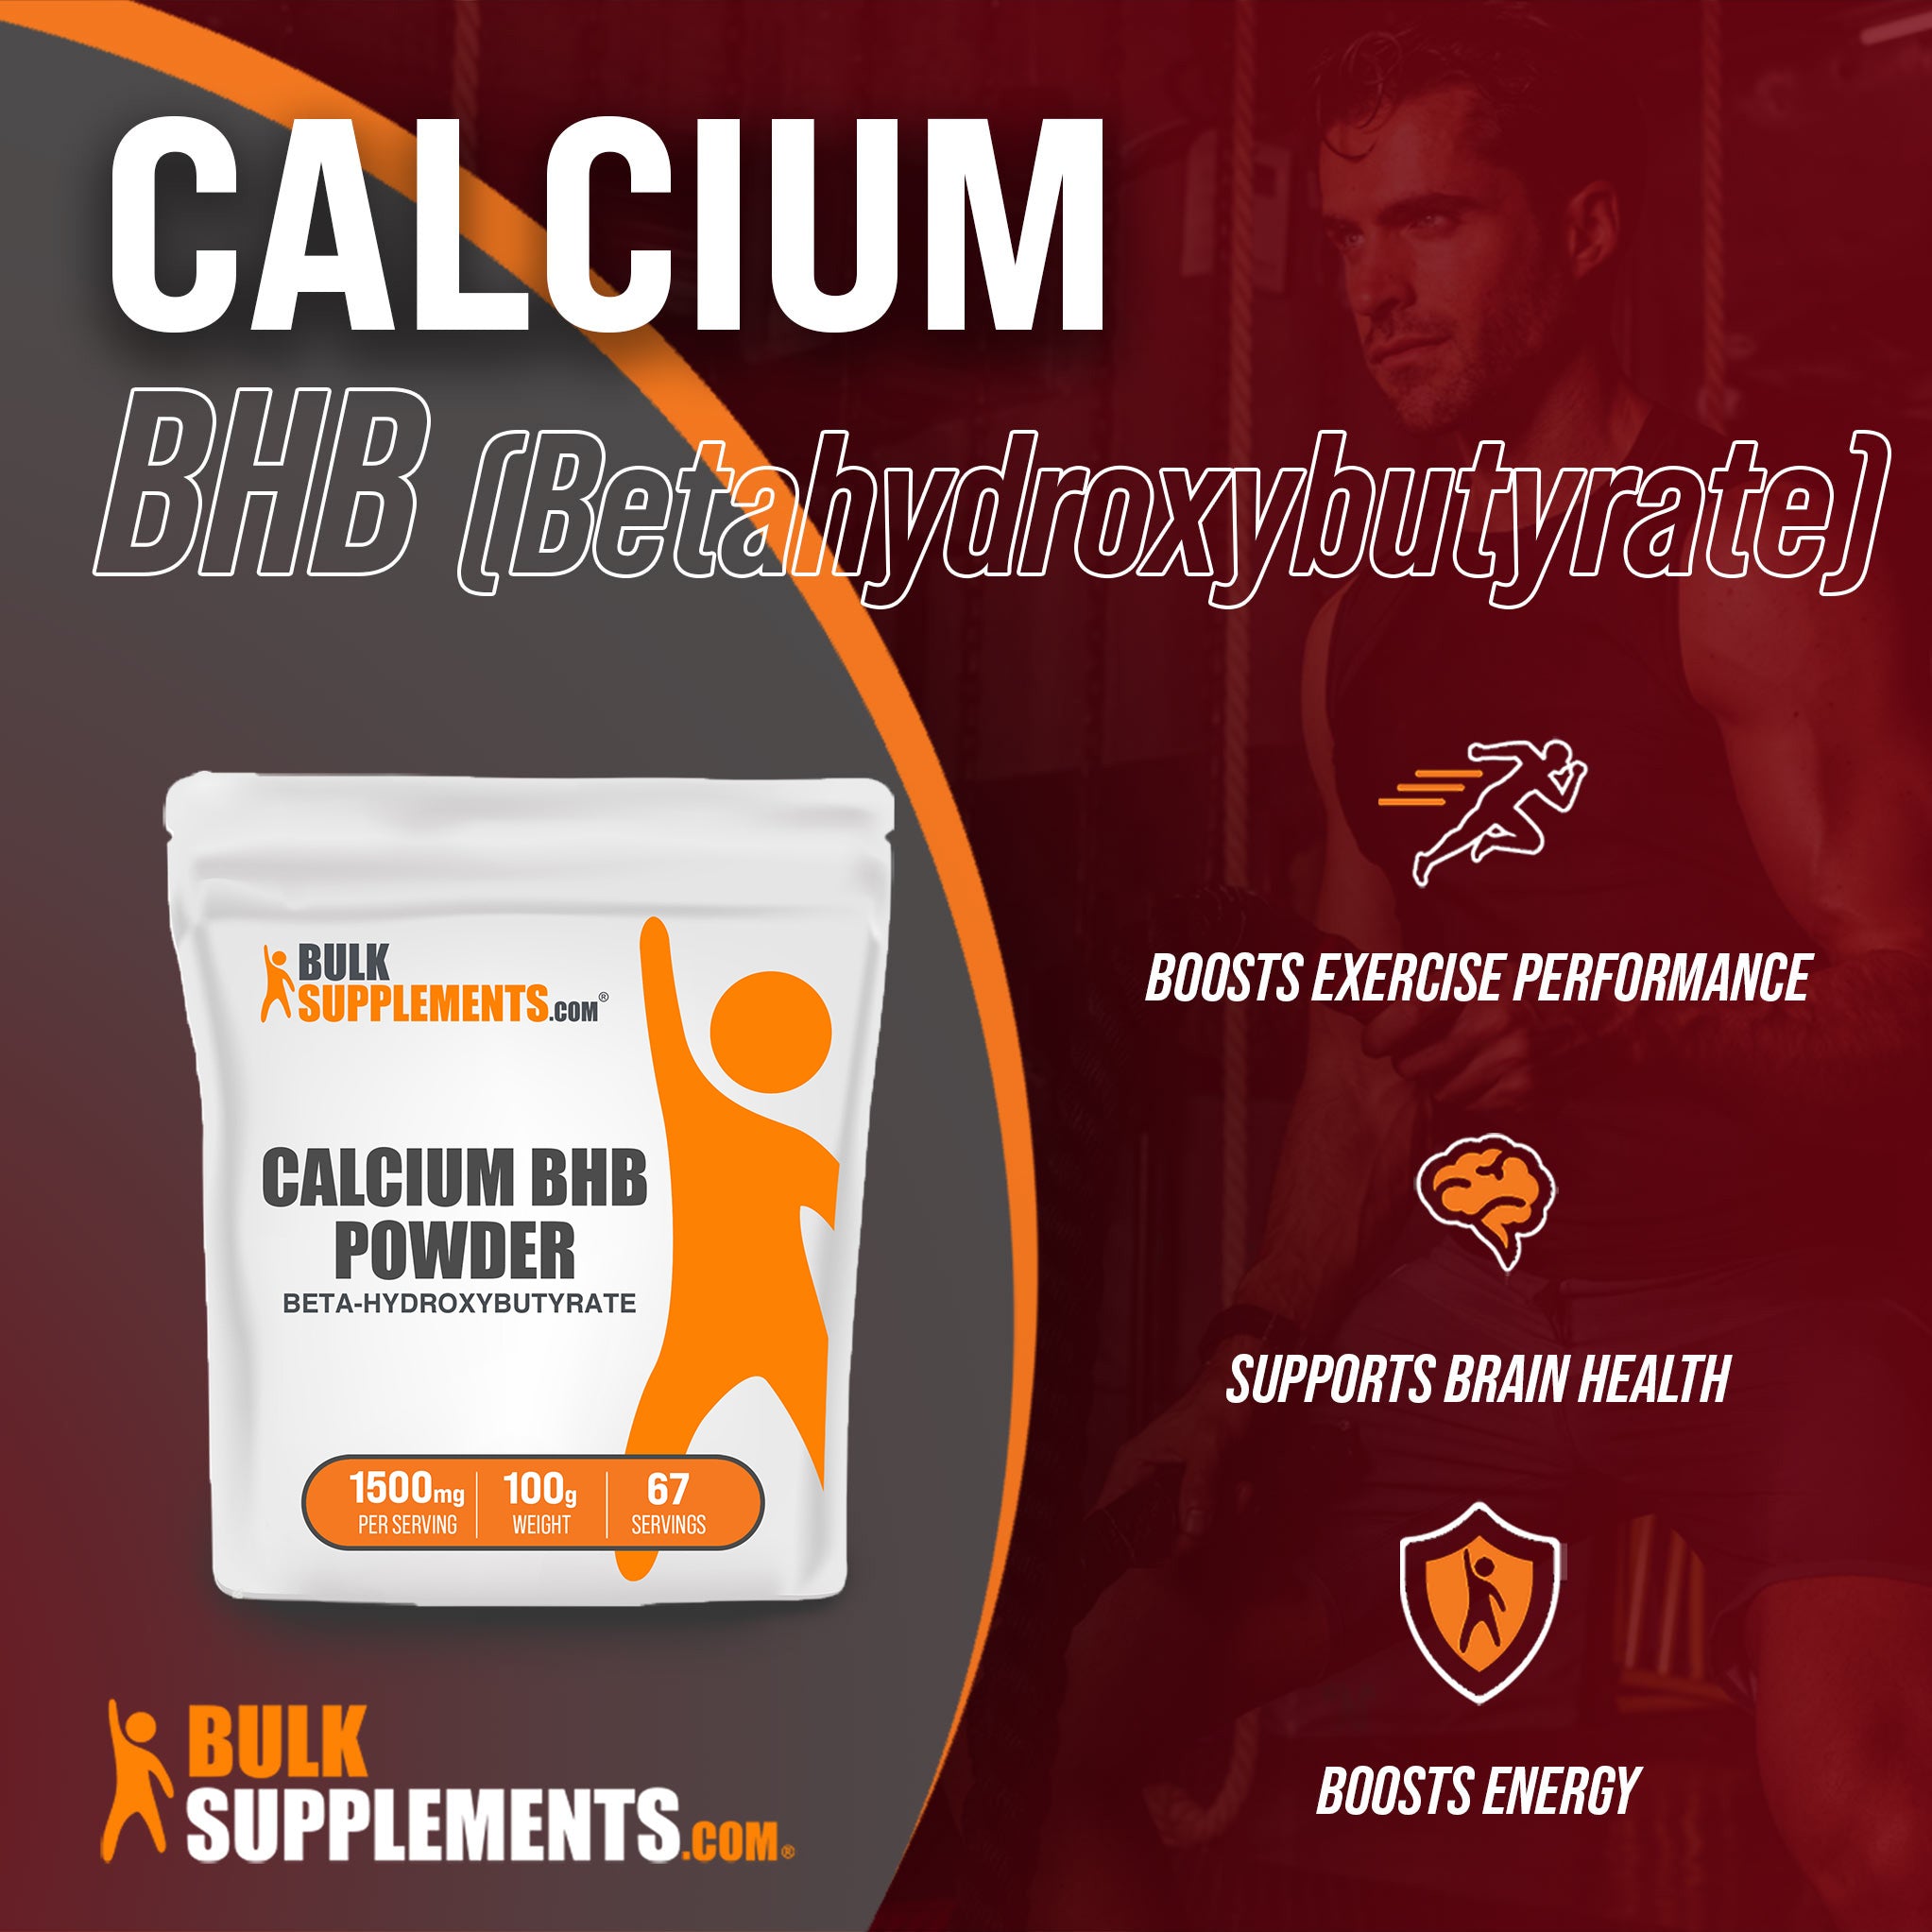 Benefits of Calcium BHB (Beta-hydroxybutyrate) Powder; Boosts exercise performance, supports brain health, boosts energy